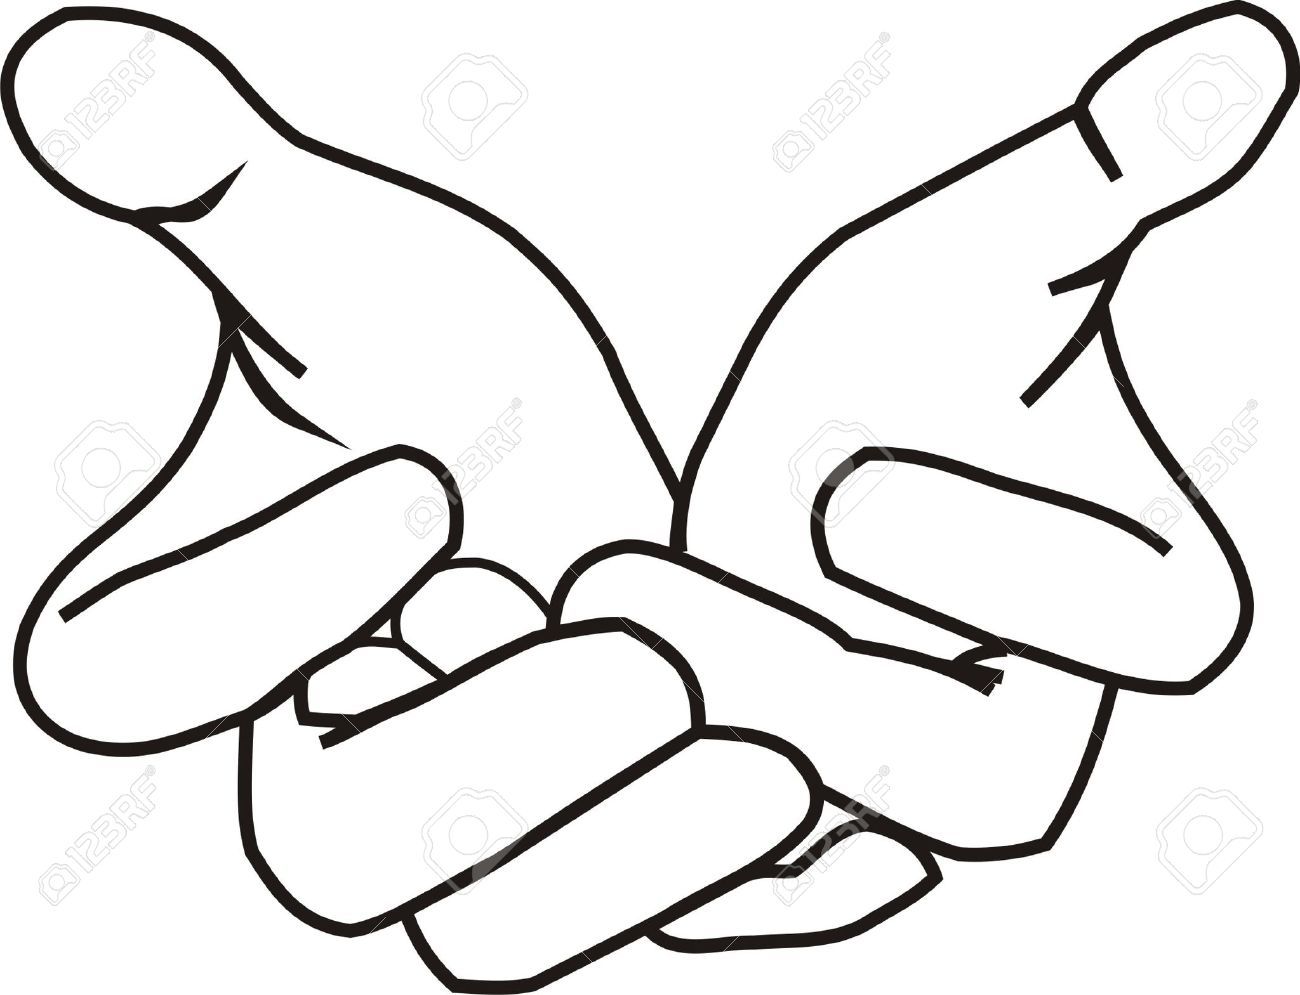 Giving hands clipart.